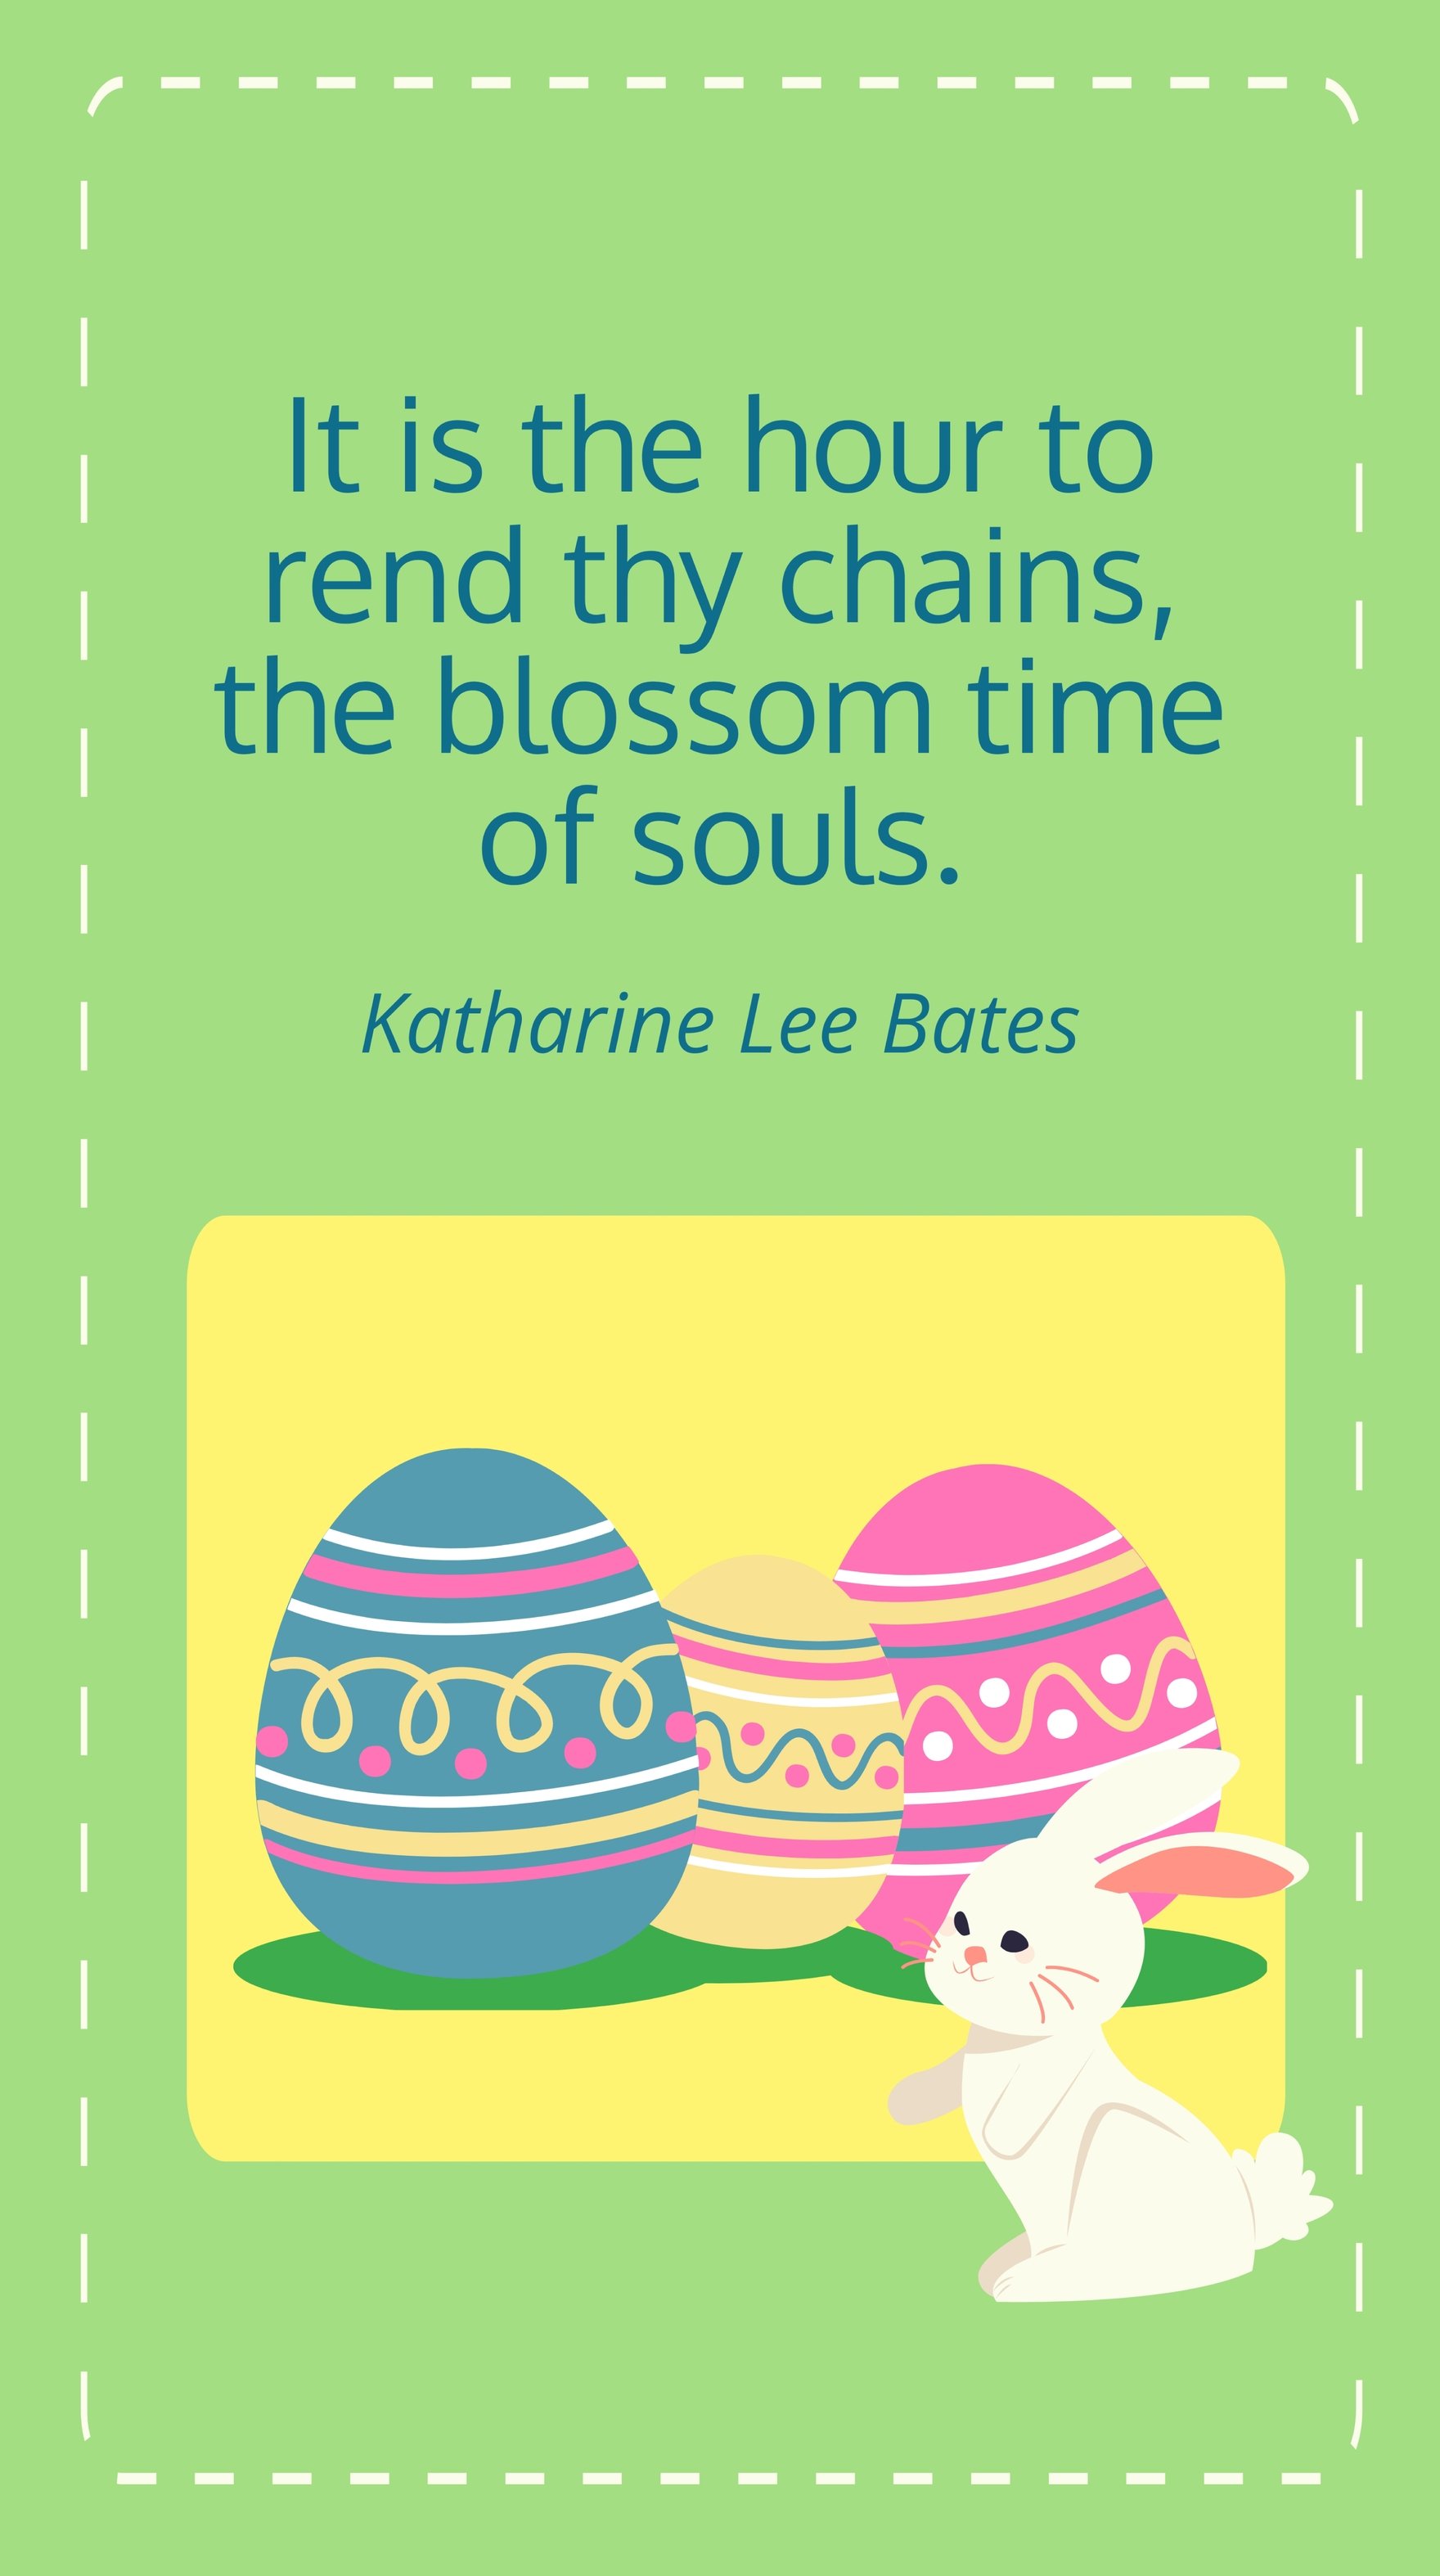 Free Katharine Lee Bates - It is the hour to rend thy chains, the blossom time of souls.